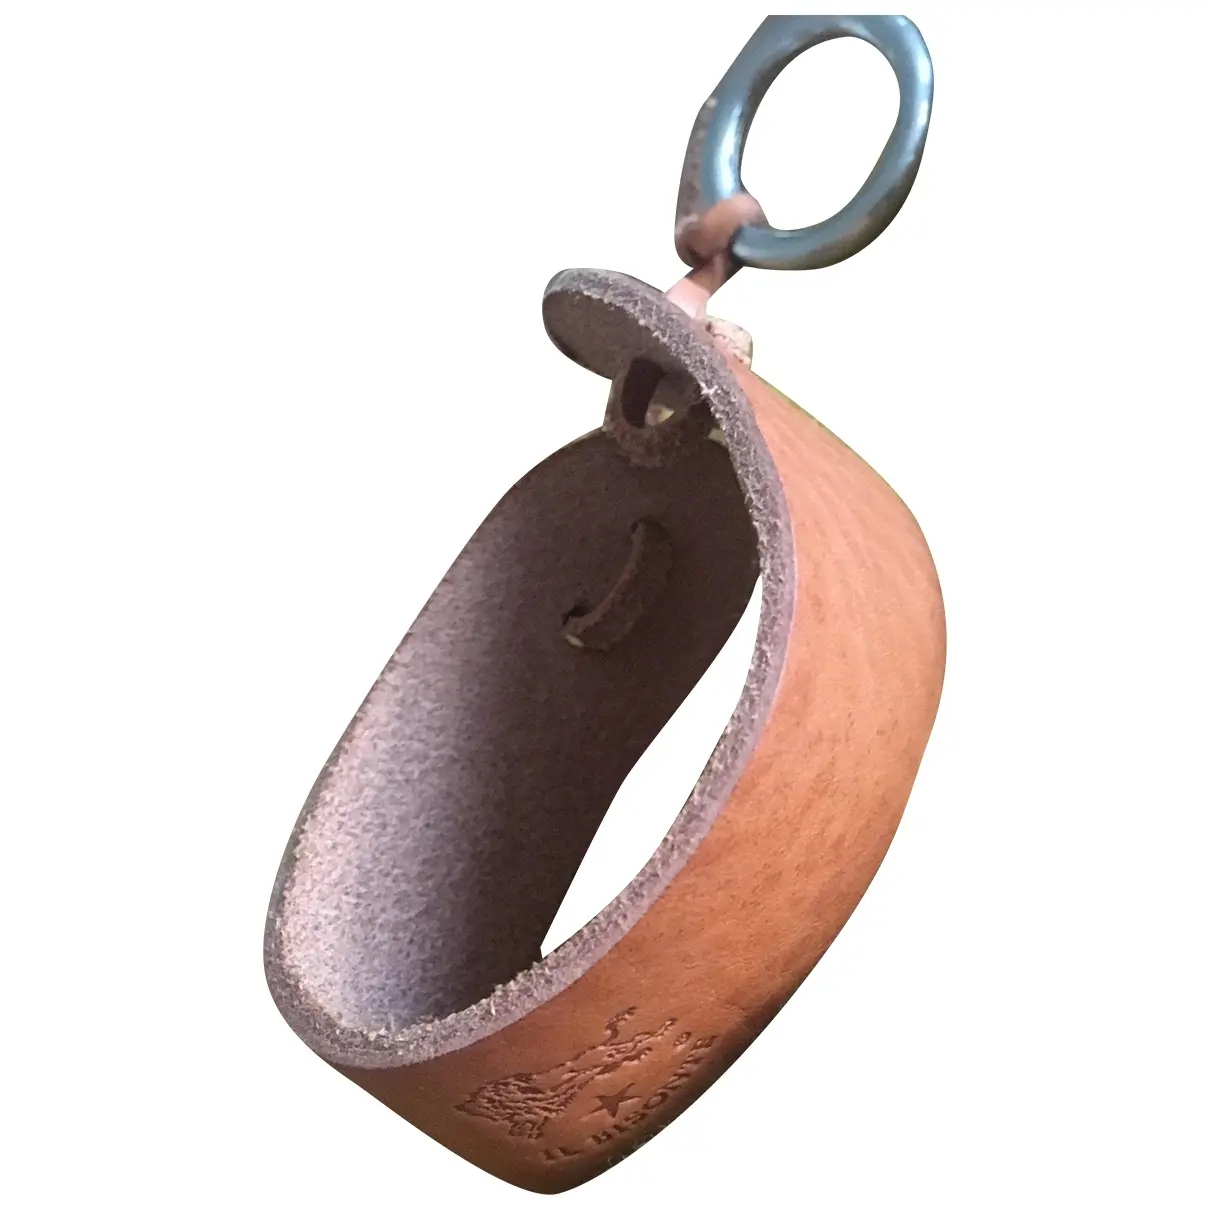 Leather jewellery Il Bisonte